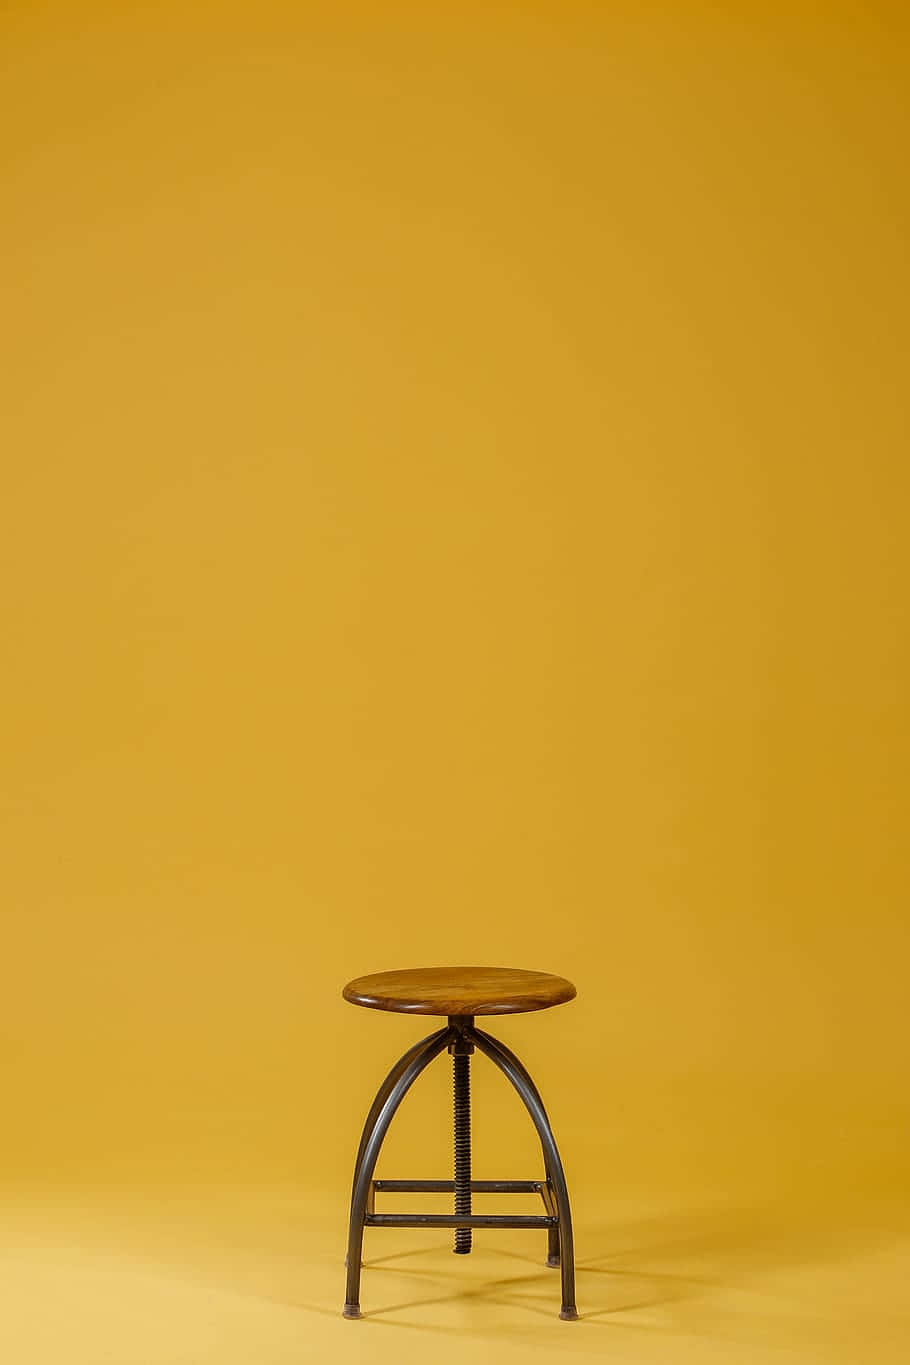 Stool Chair With Round Brown Wooden Top Background